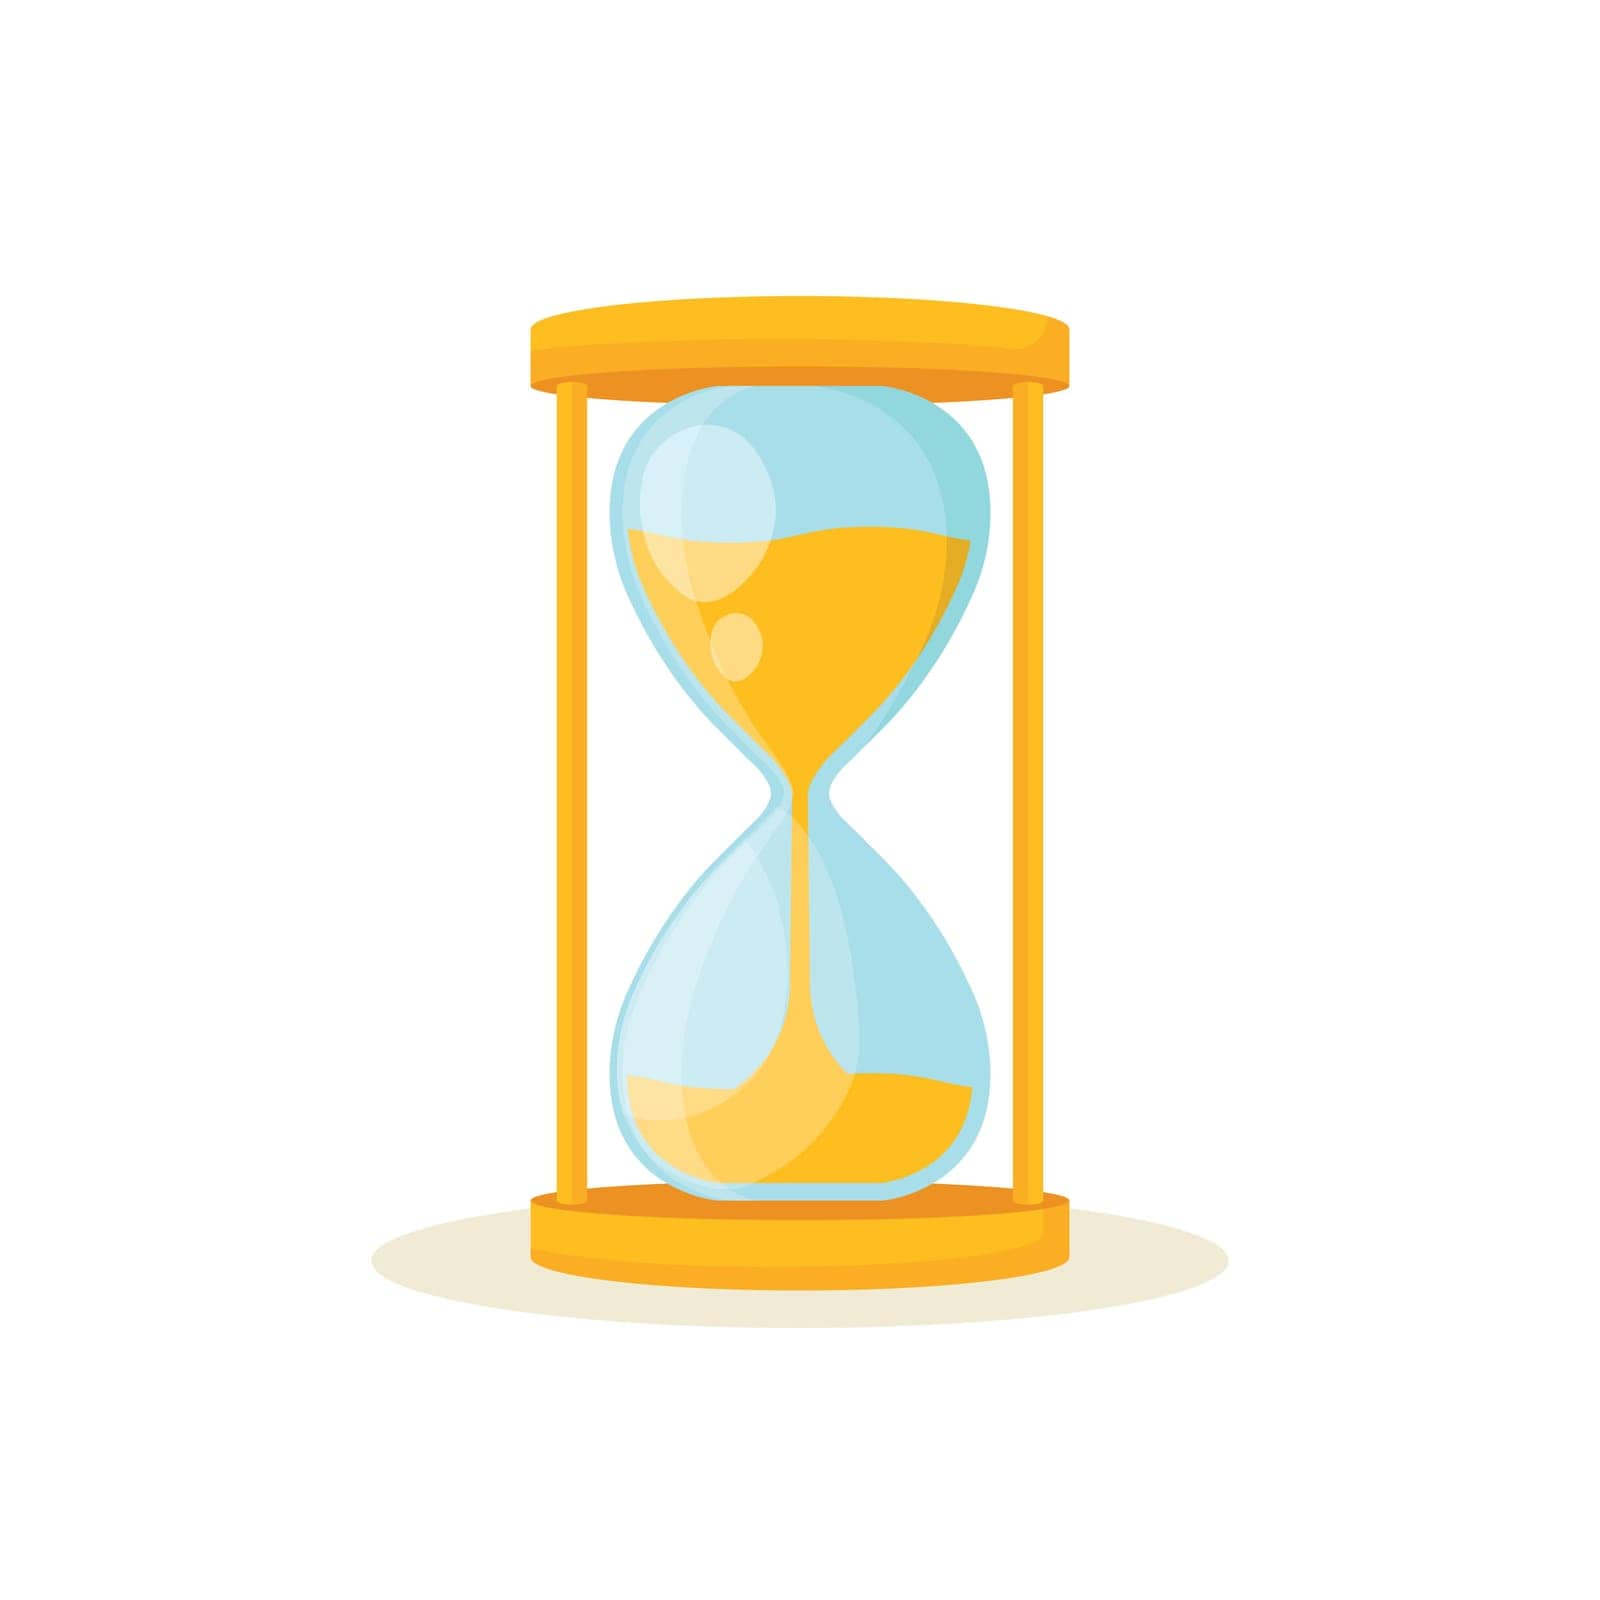 Hourglass icon in flat style. Sandglass vector illustration on isolated background. Sand clock sign business concept.